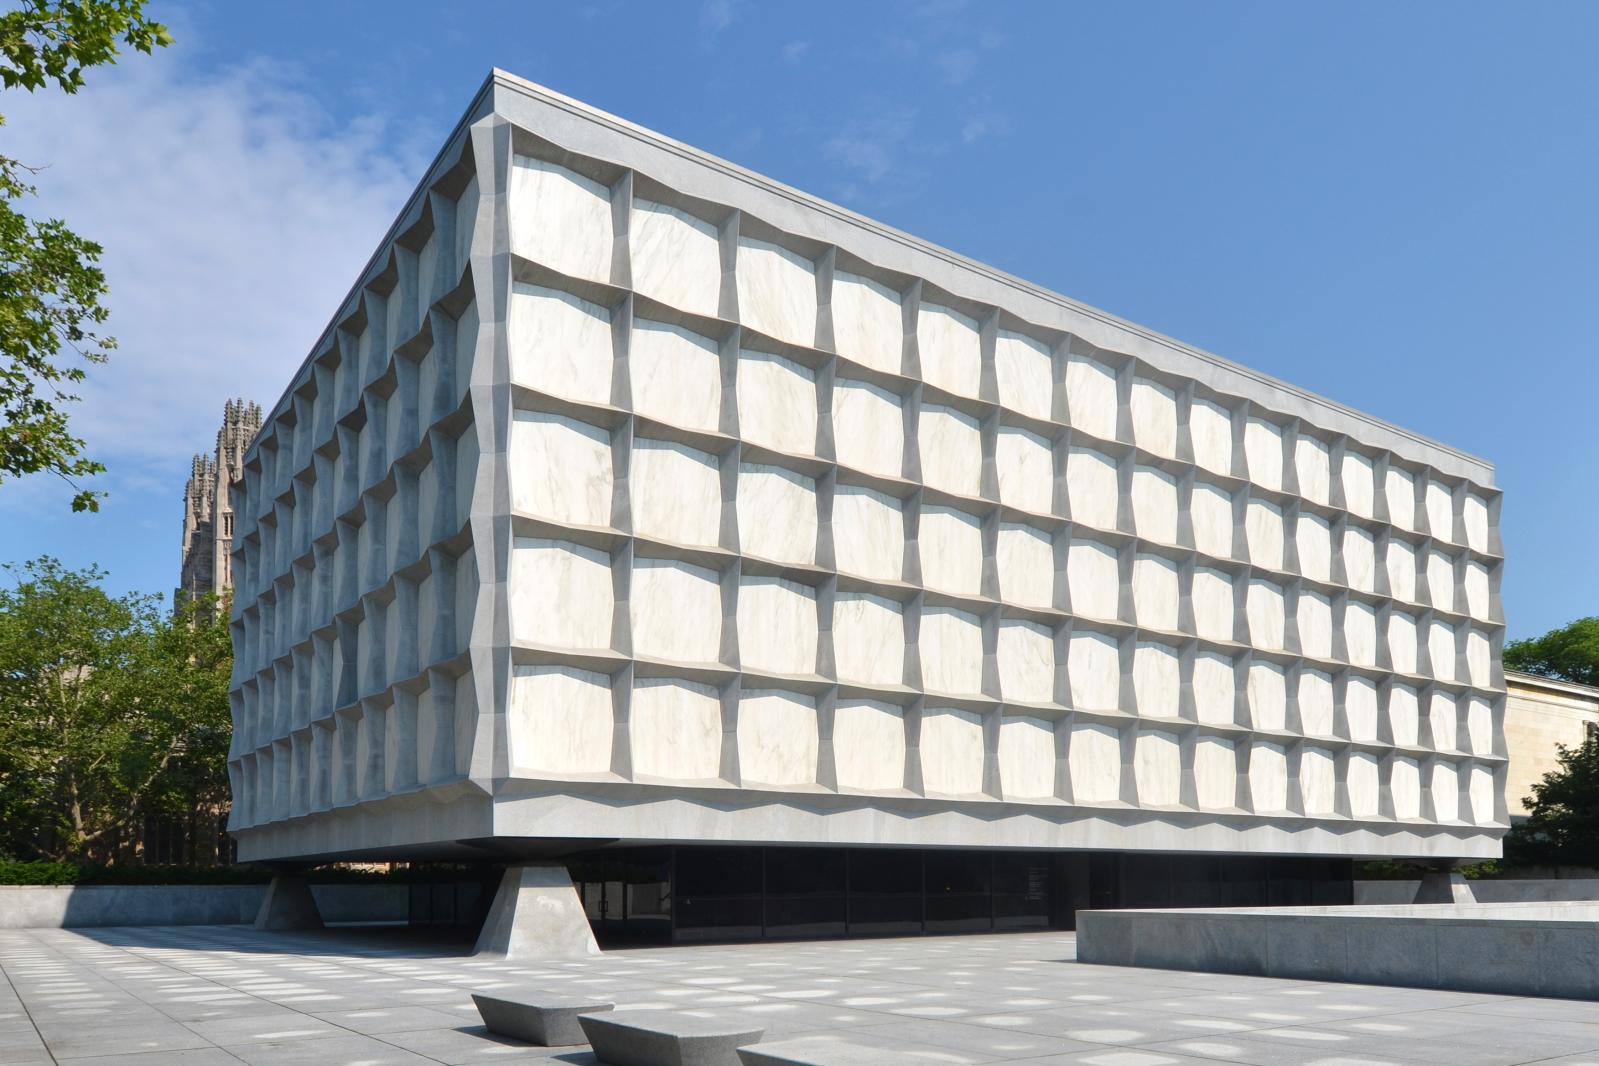 The Beinecke Rare Book and Manuscript Library